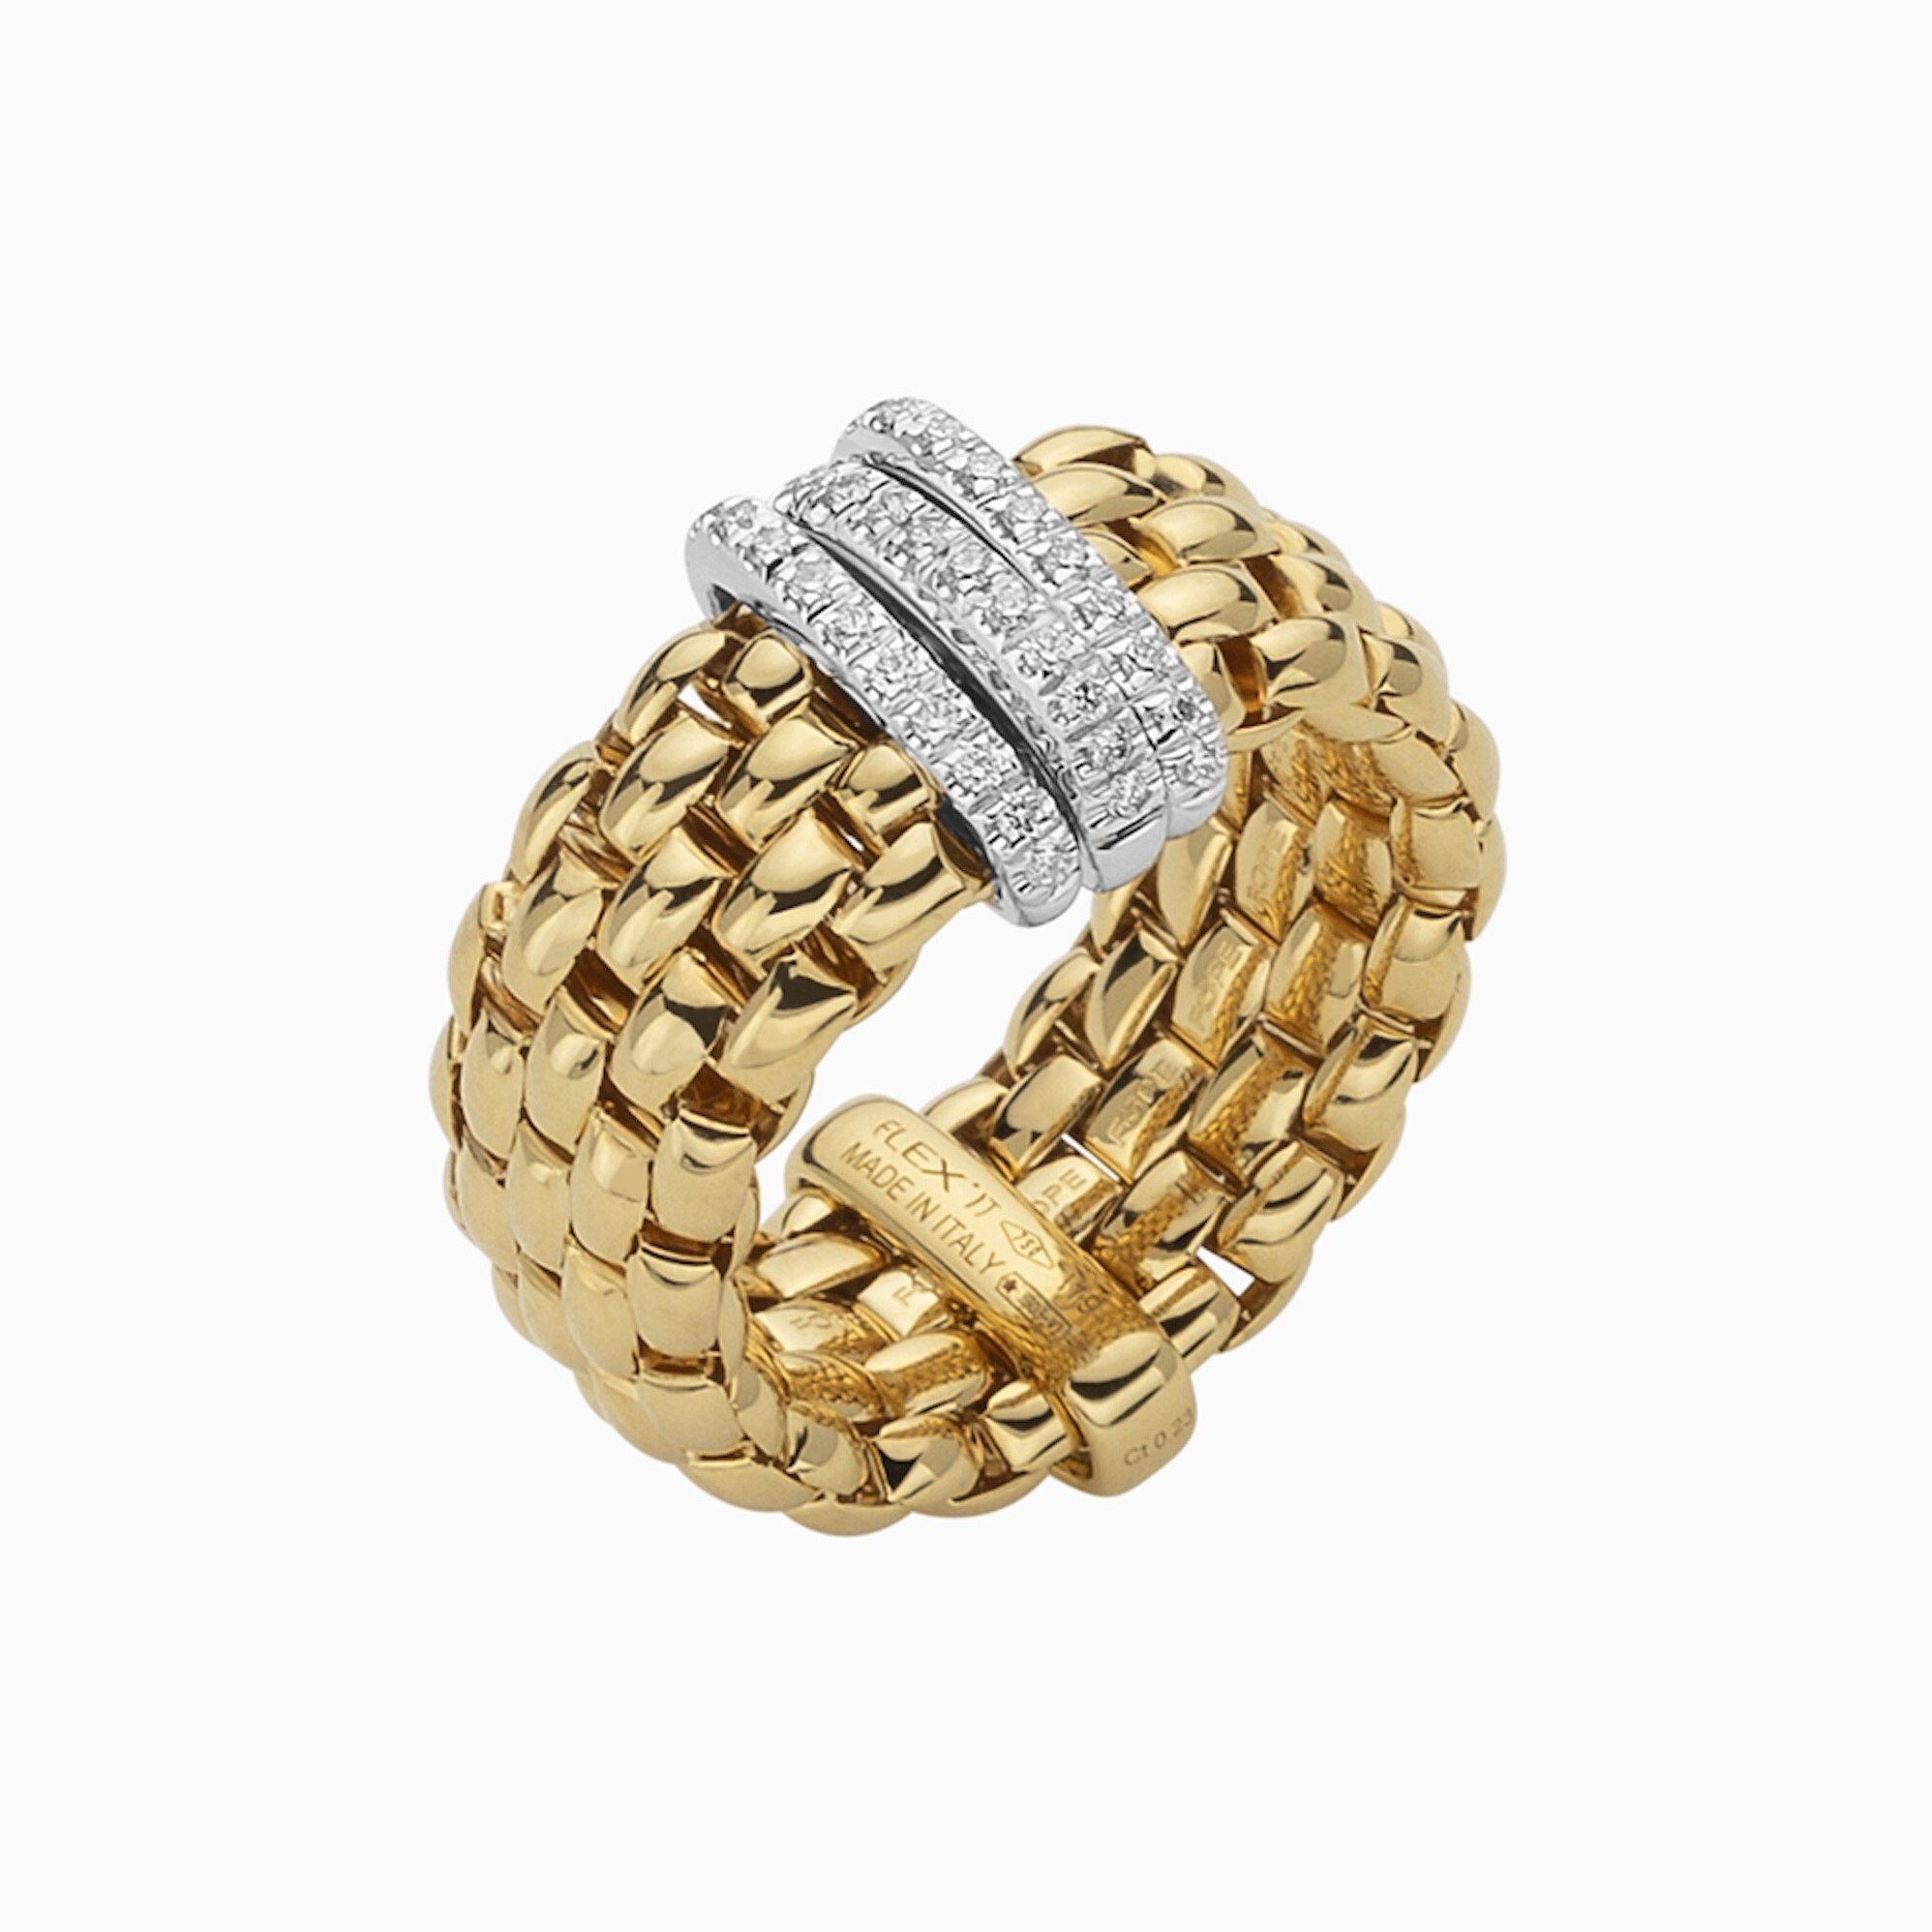 Panorama Ring in 18kt Yellow Gold with 3 White Gold and White Diamond Pave Bars - XL